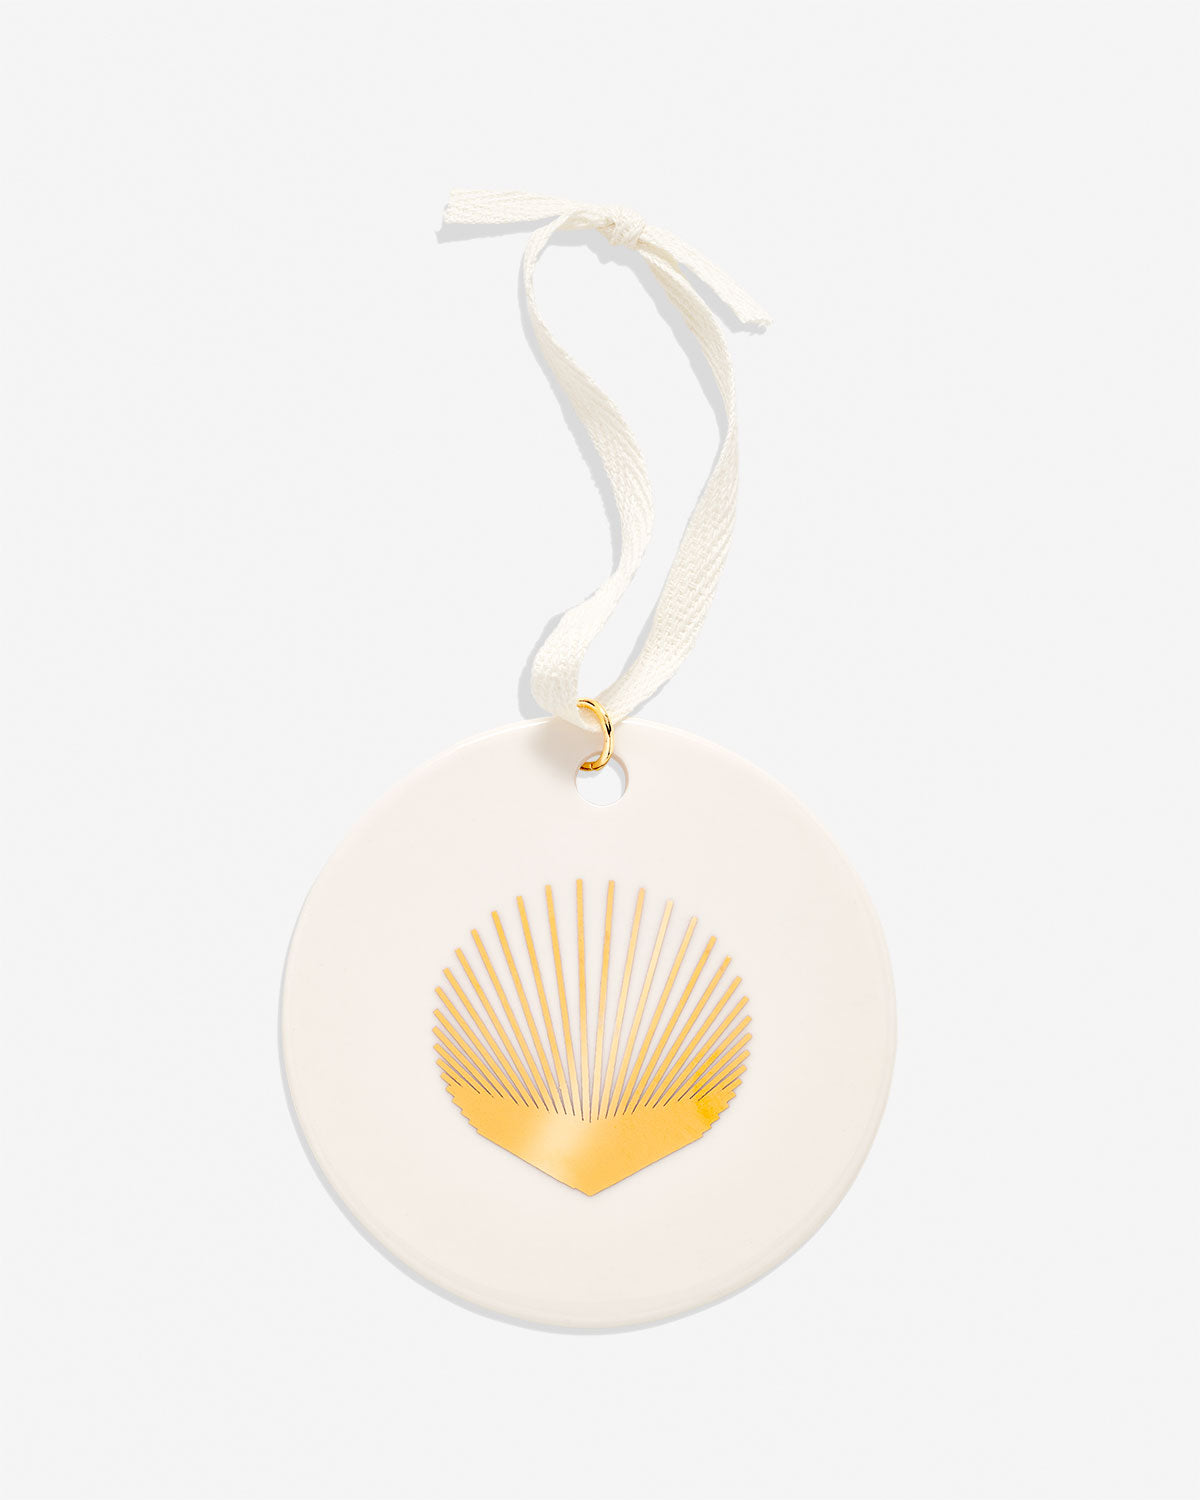 Bryan Anthonys Grit White Ceramic Holiday Ornament in Gold